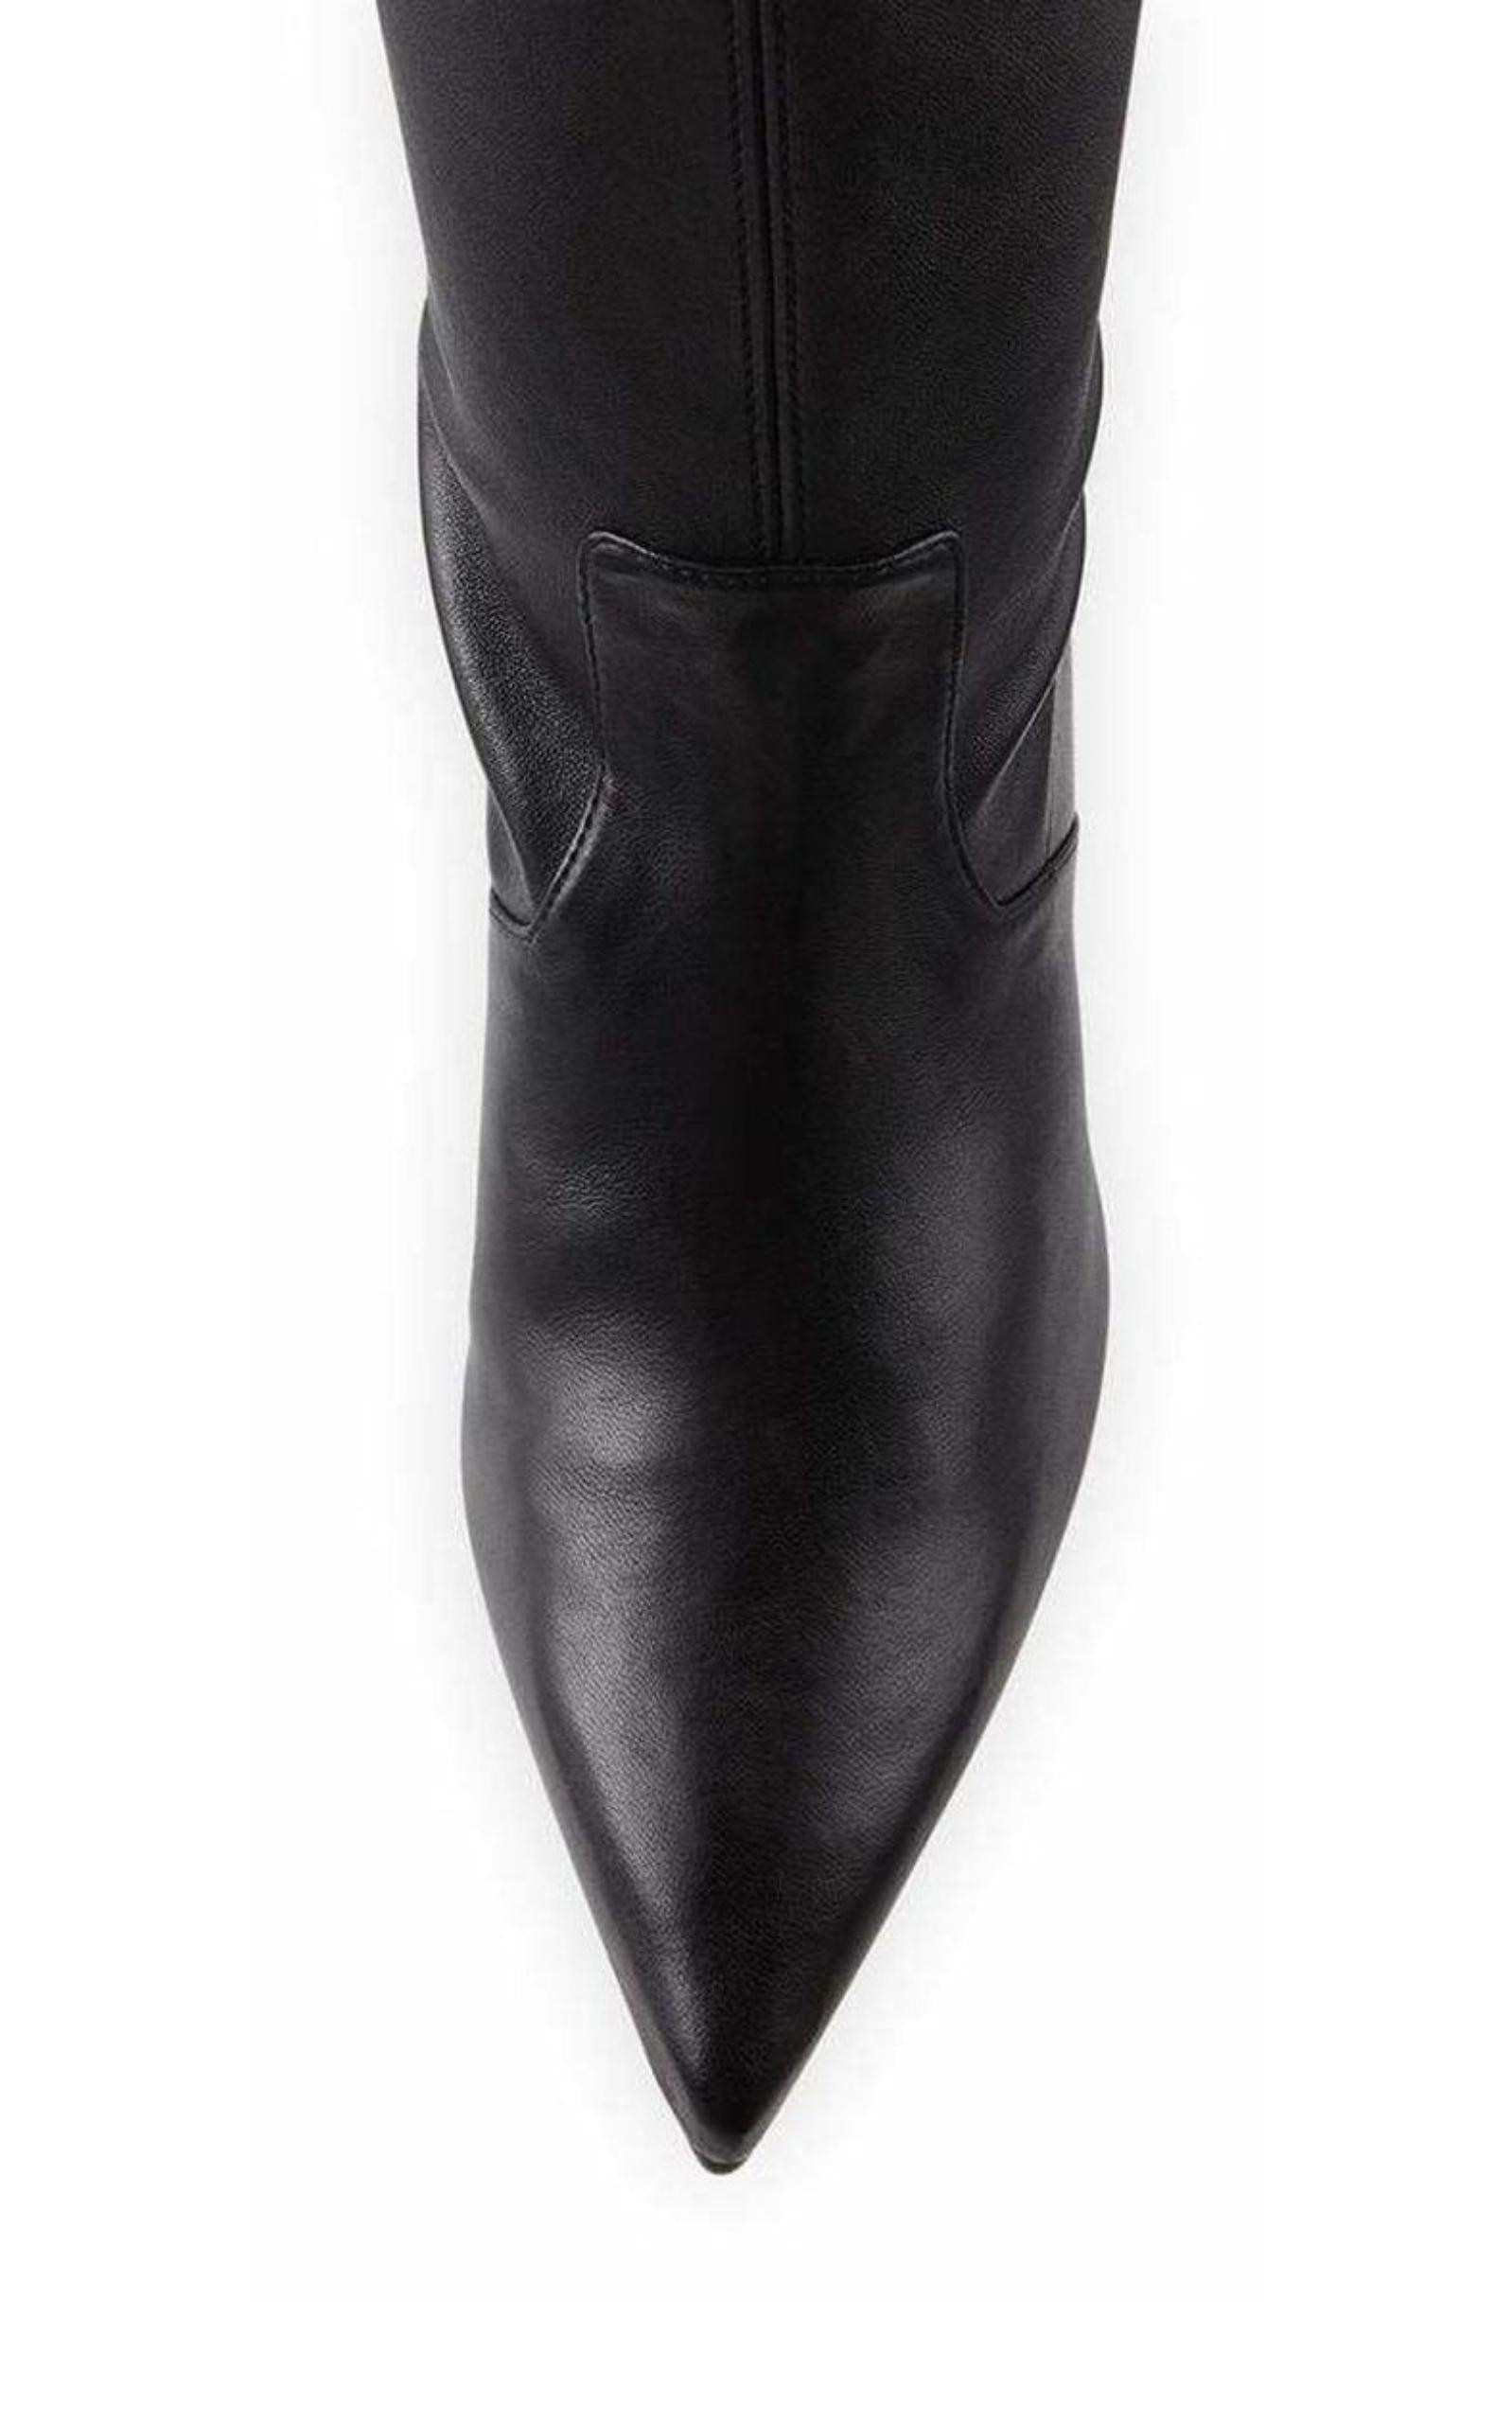 Natalia Over the Knee Length Stretch Leather Boots